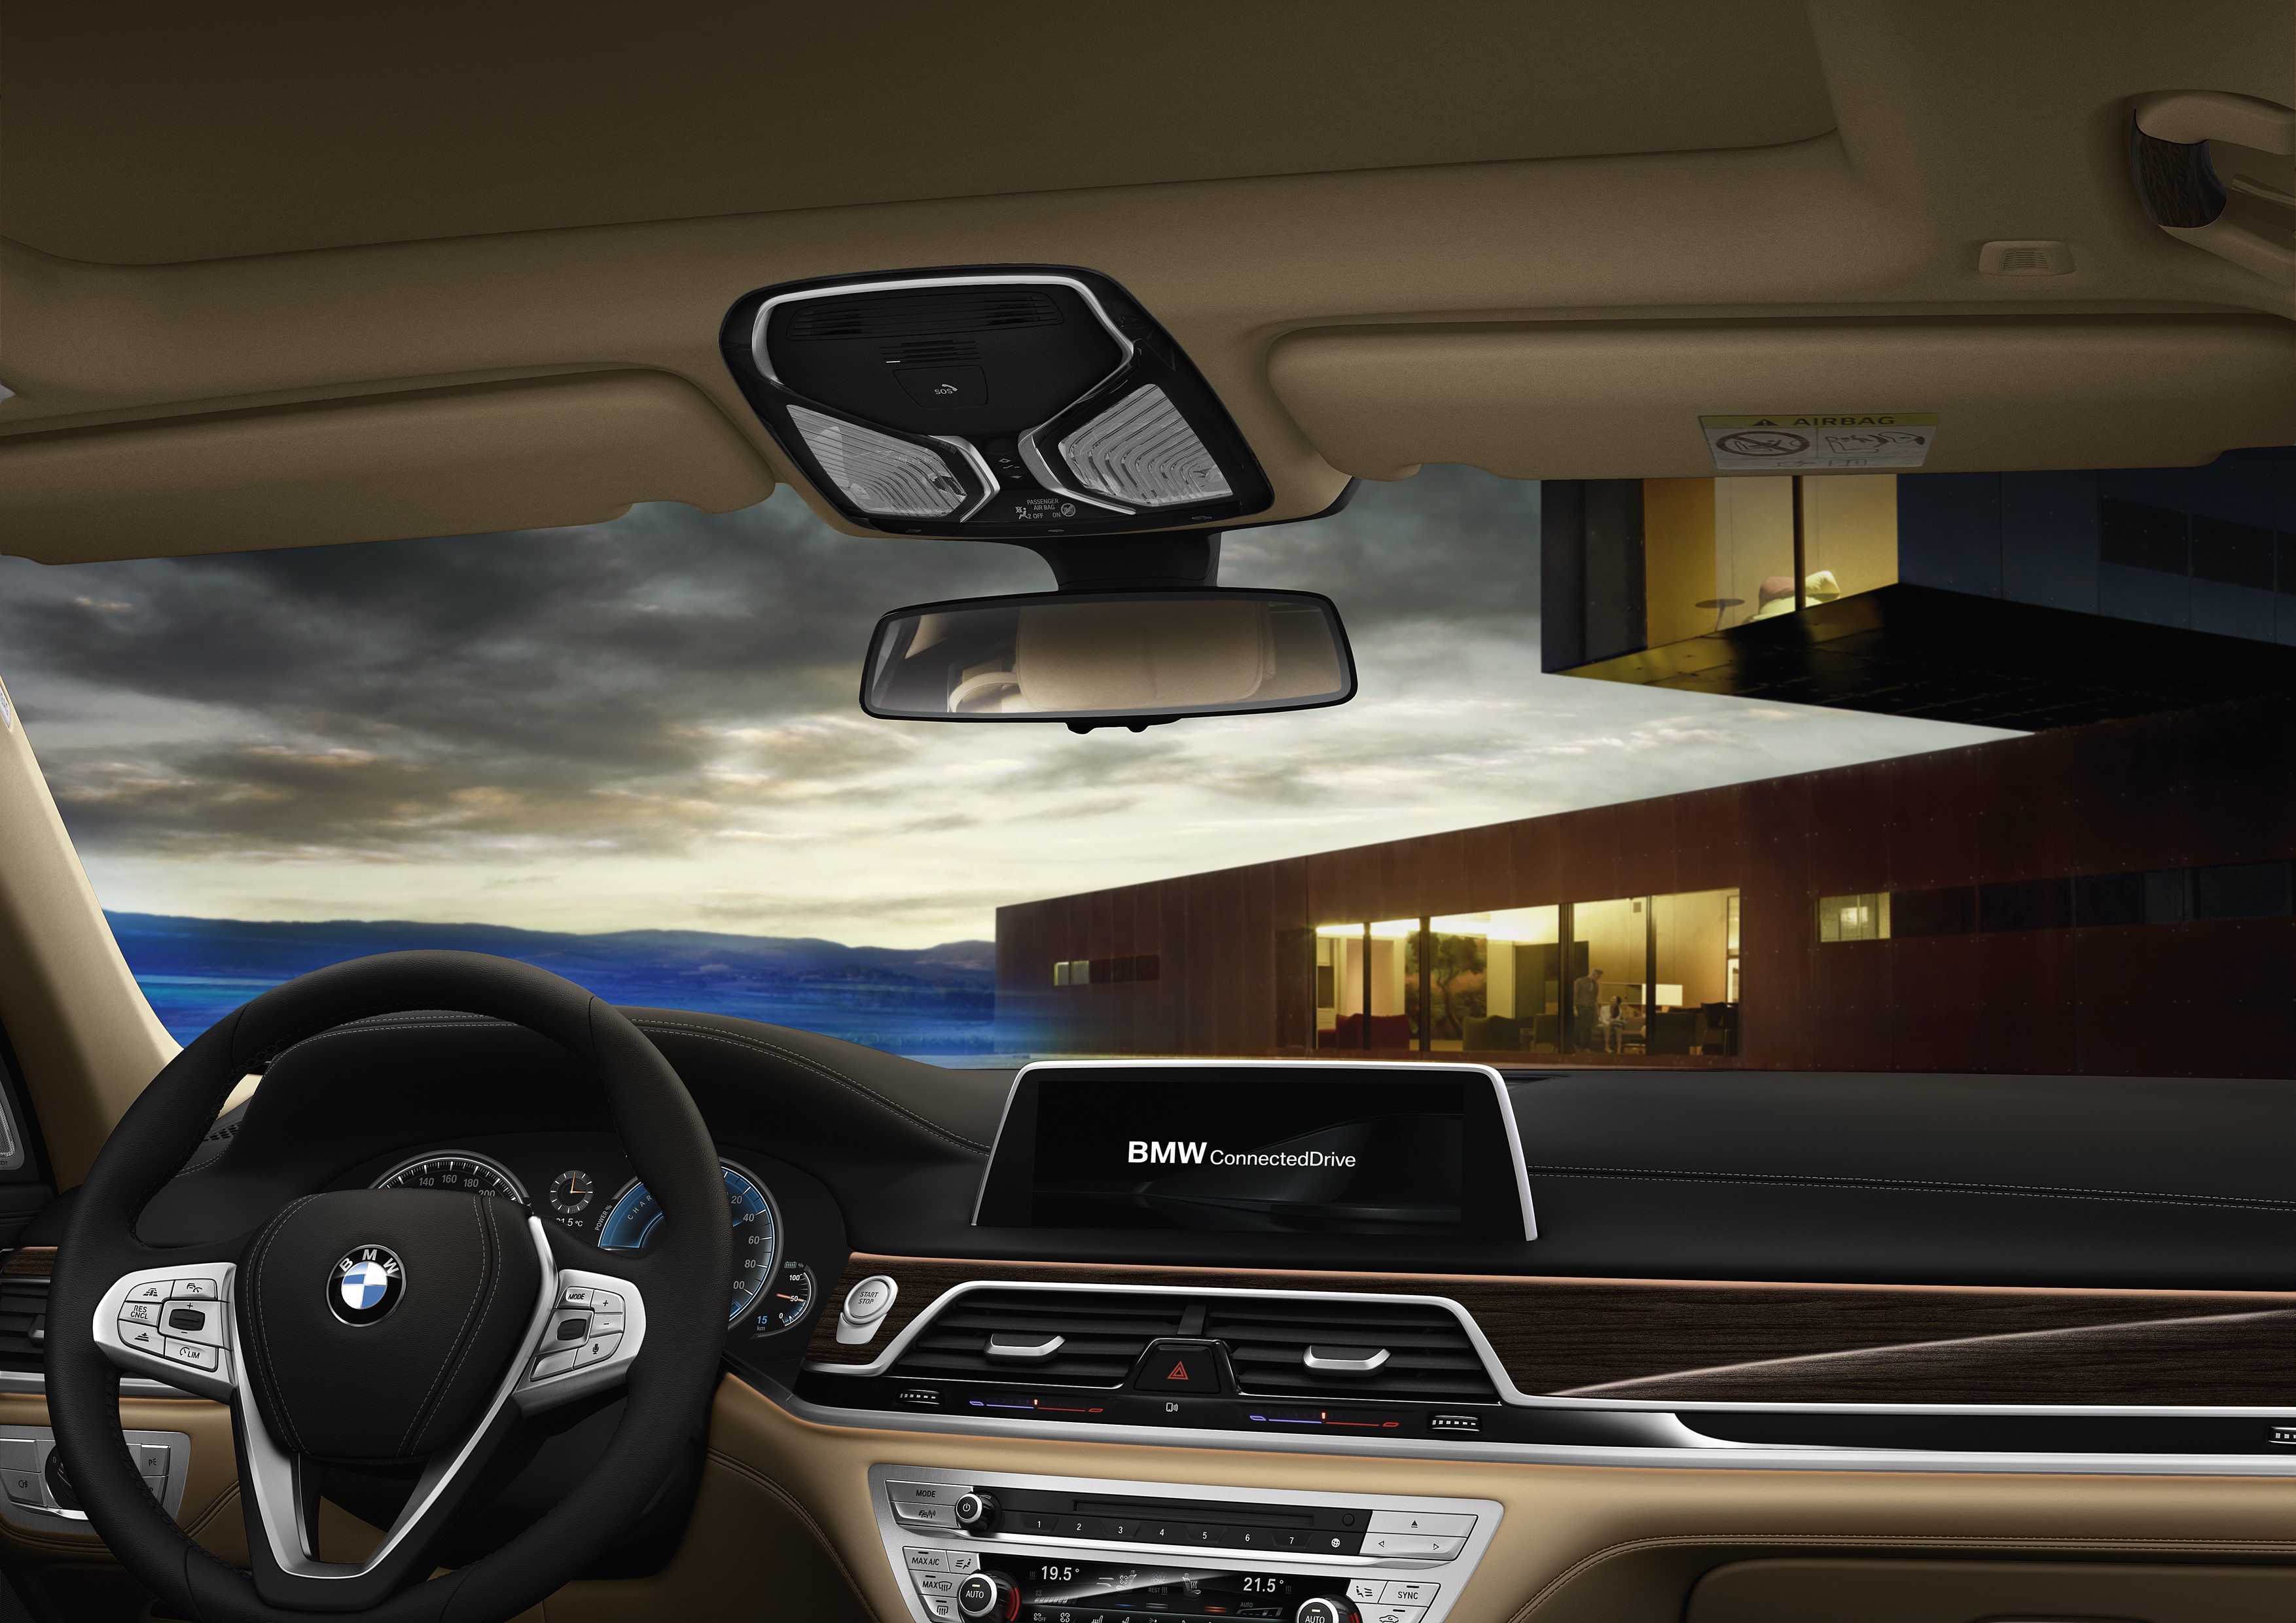 2016 BMW 7 Series Wallpapers and Videos Want to Pull You Into a World